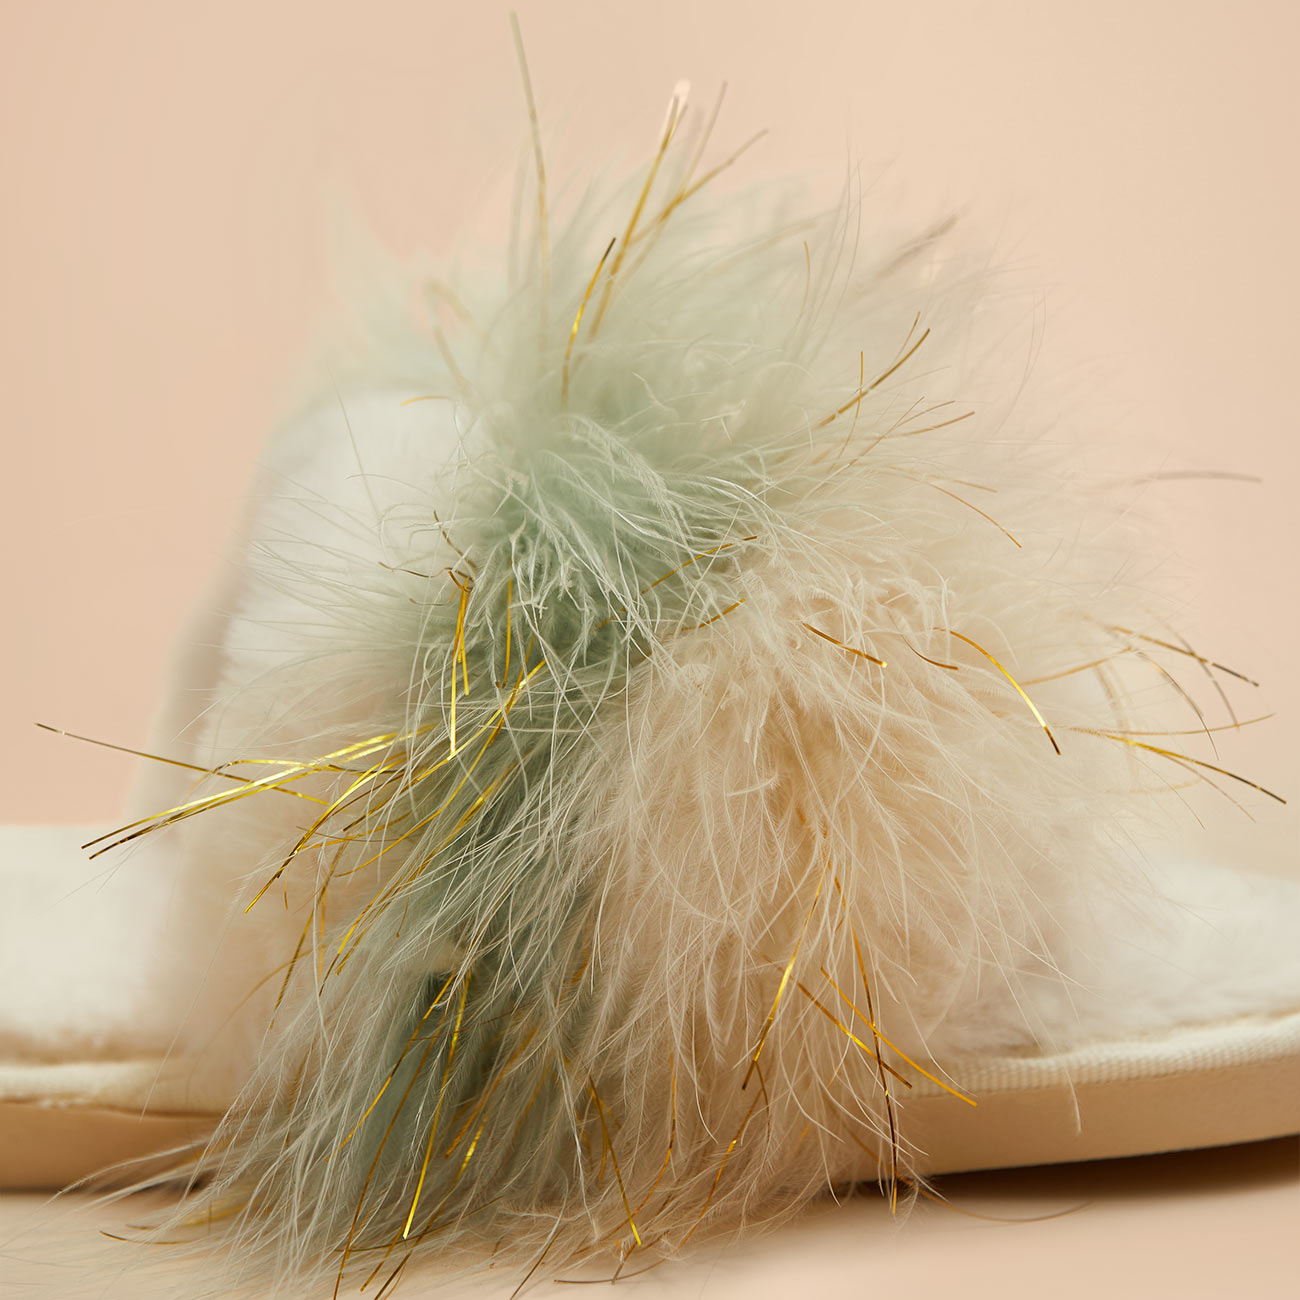 Sage Fluffy Feather Slippers by Birdy Grey